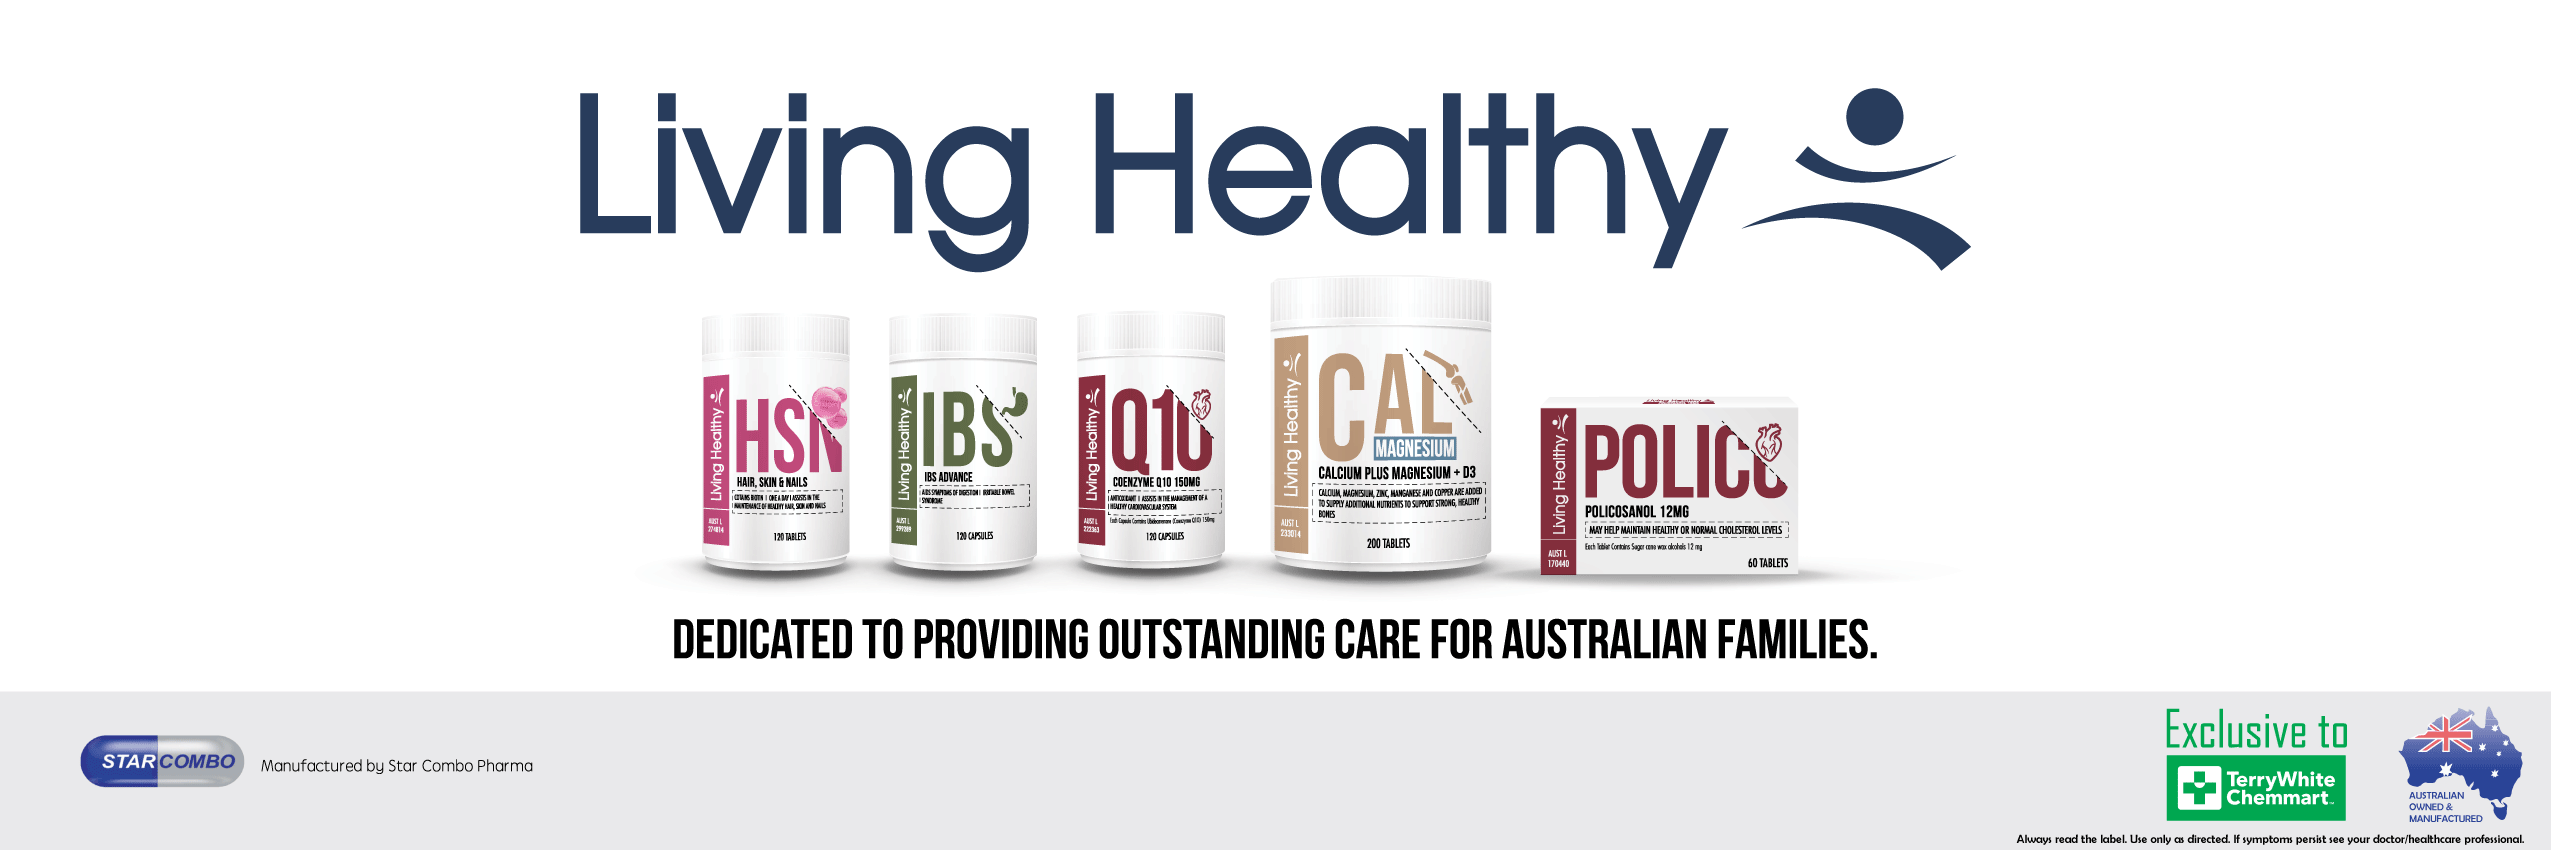 Living Healthy and Little Koala Products